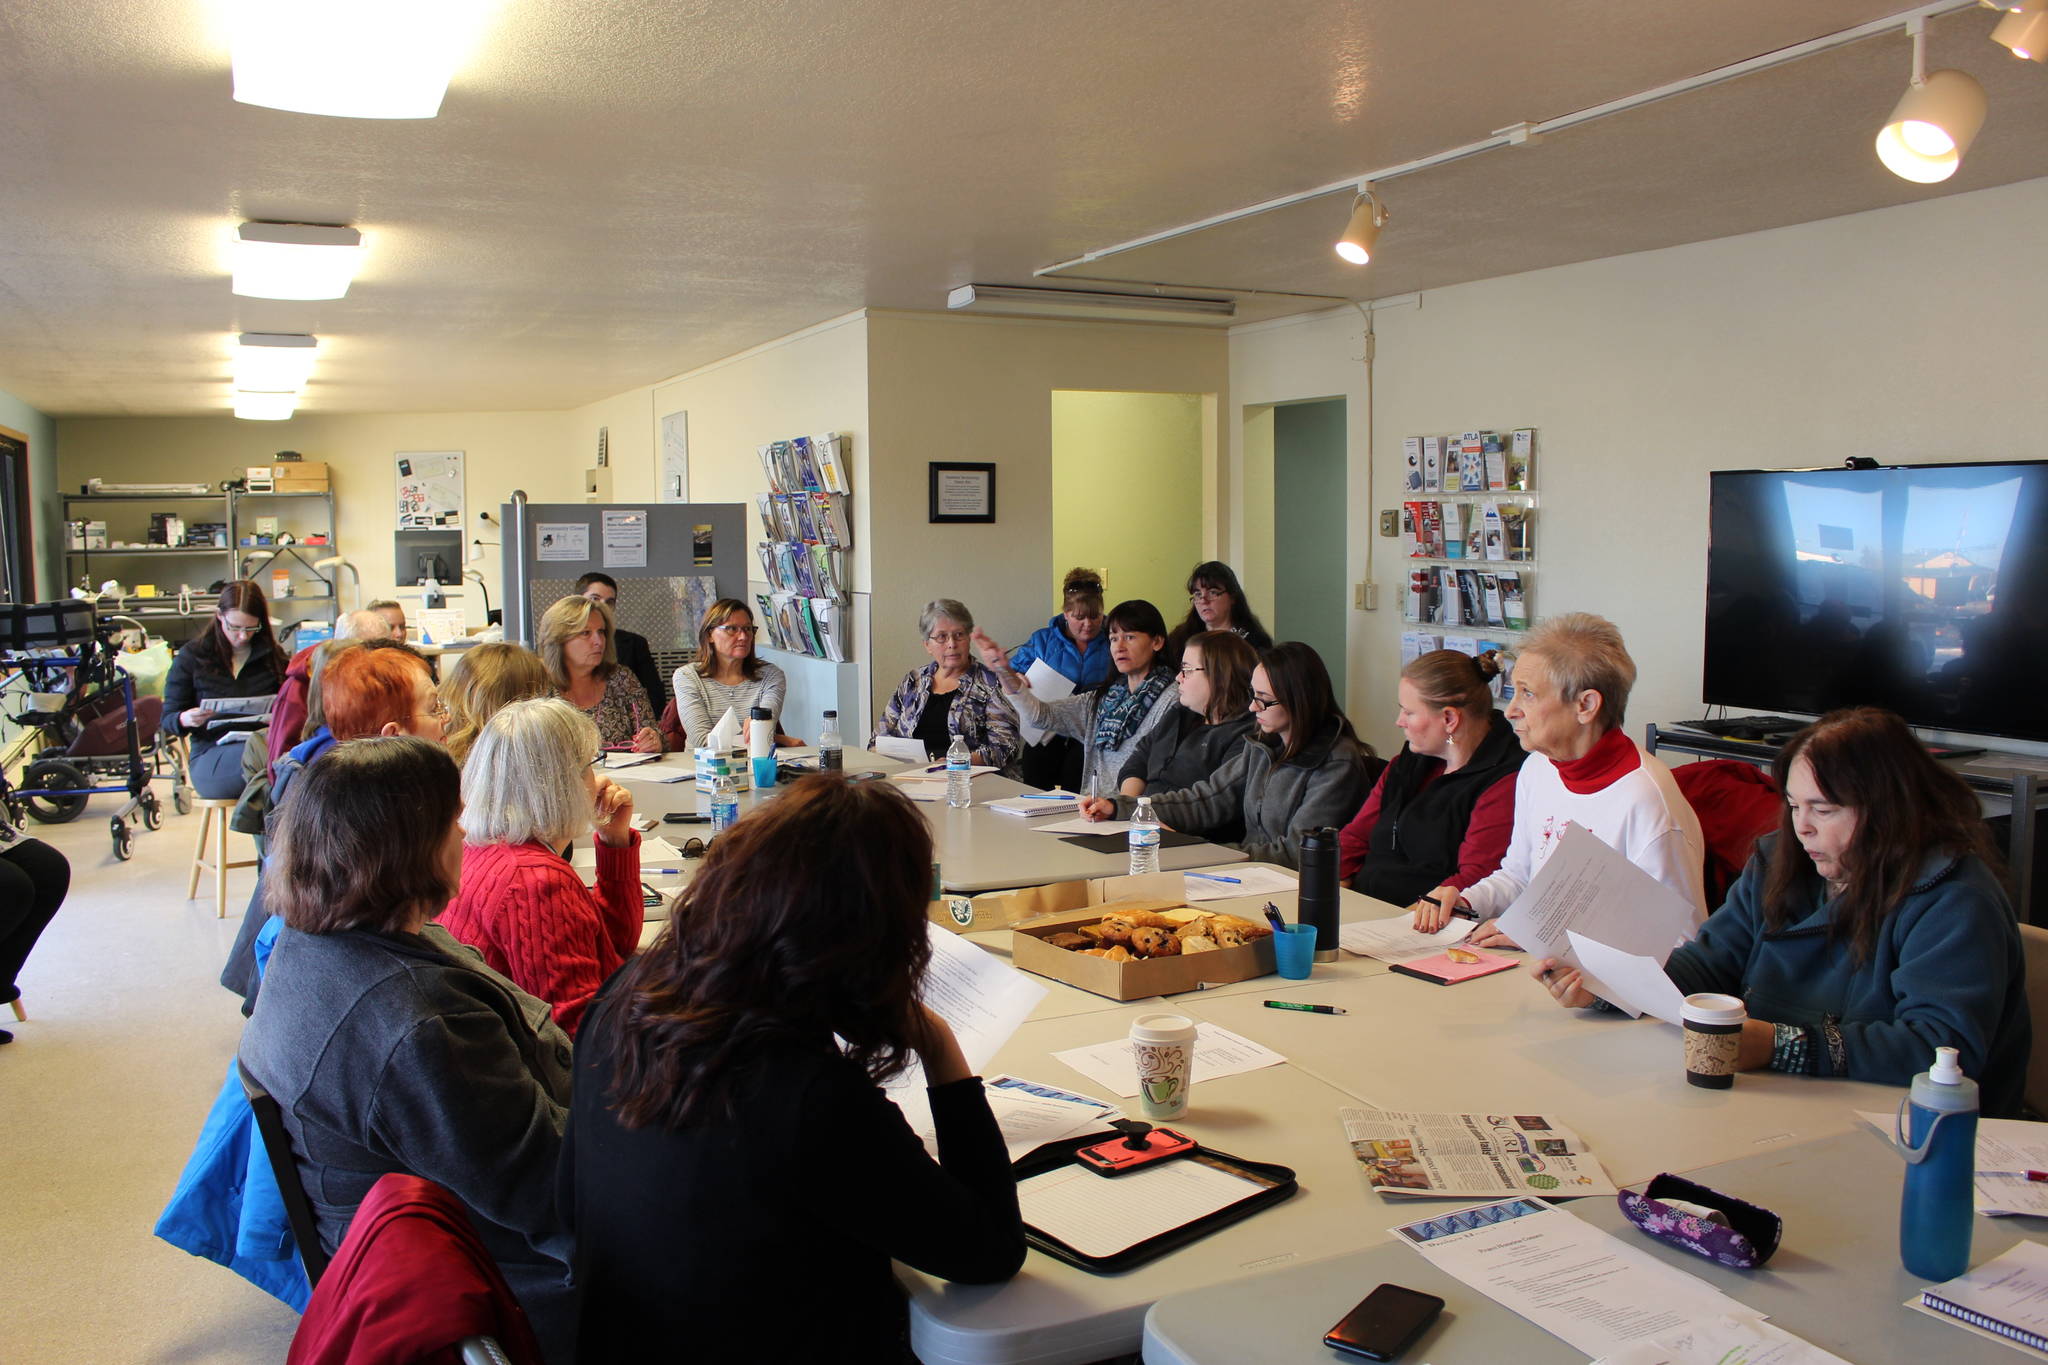 Organizers for Project Homeless Connect meet at the Independent Living Center in Kalifornsky, Alaska on Dec. 10, 2019. (Photo by Brian Mazurek/Peninsula Clarion)